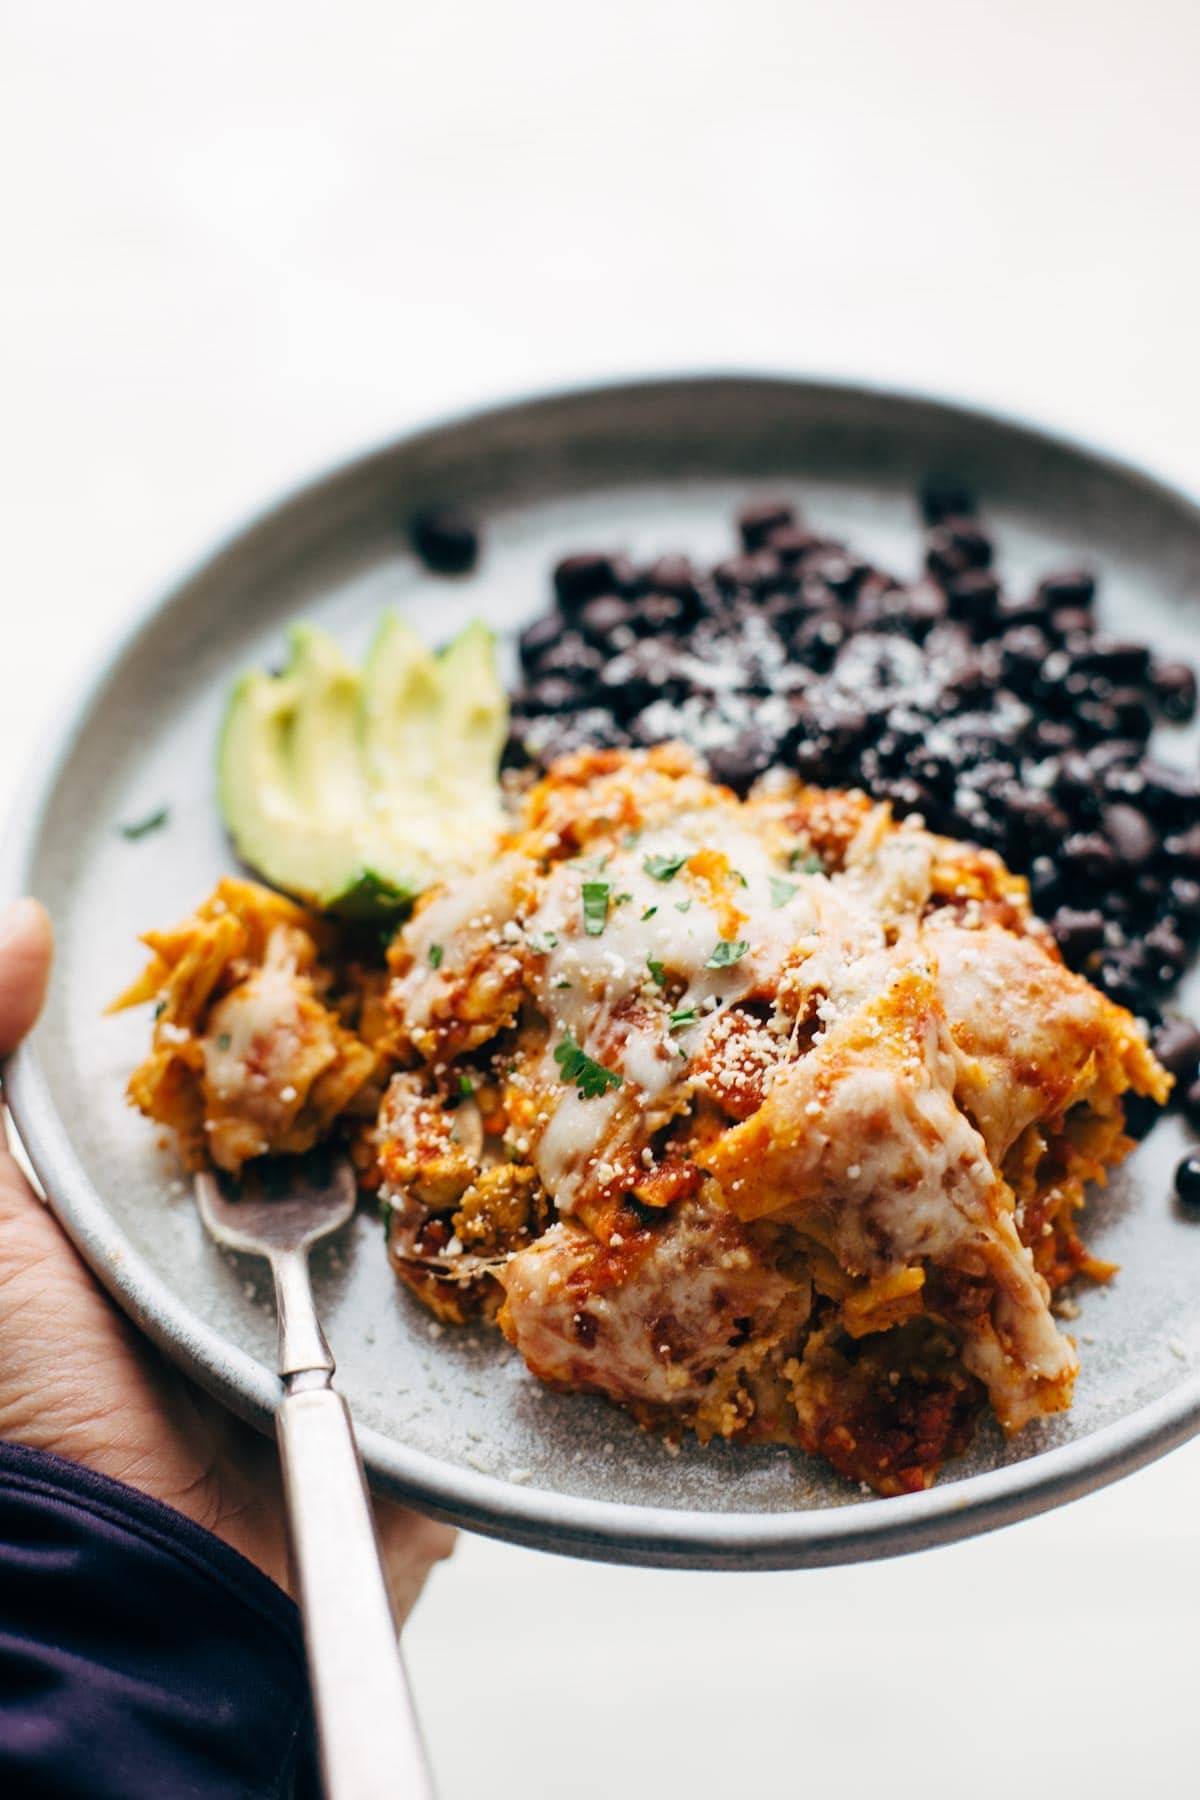 Sofritas casserole with avocado and black beans on a plate with a fork.